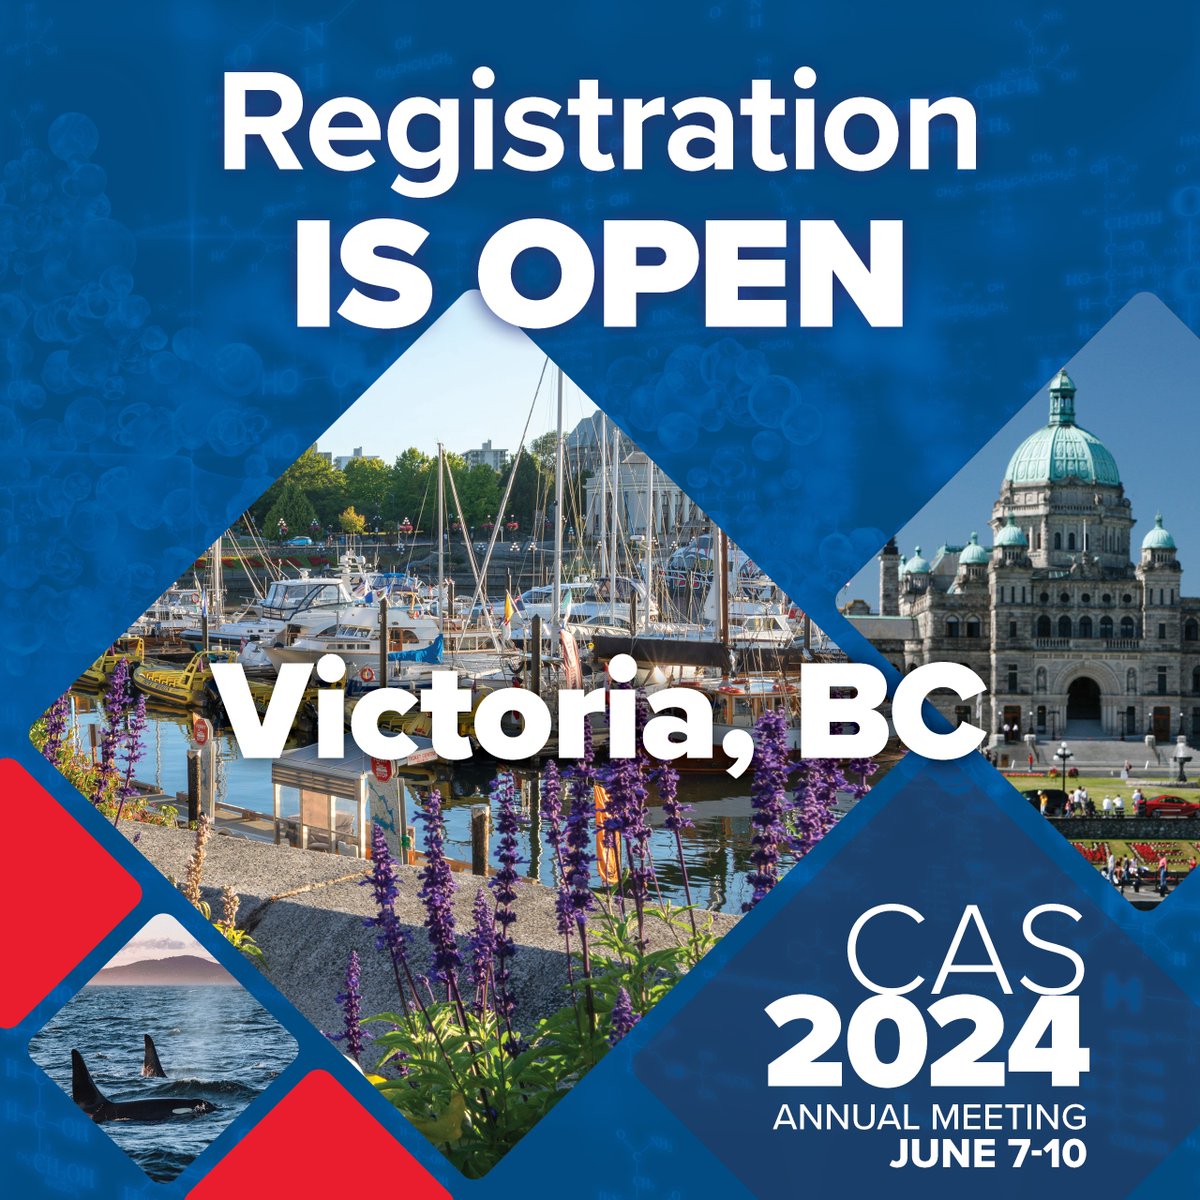 CAS Annual Meeting registration is open! Join us in Victoria this summer, June 7-10 for #CASAM2024. Don't miss out on our exceptional event featuring a captivating scientific program, networking opportunities. Full details / Program - cas.ca/AM-register